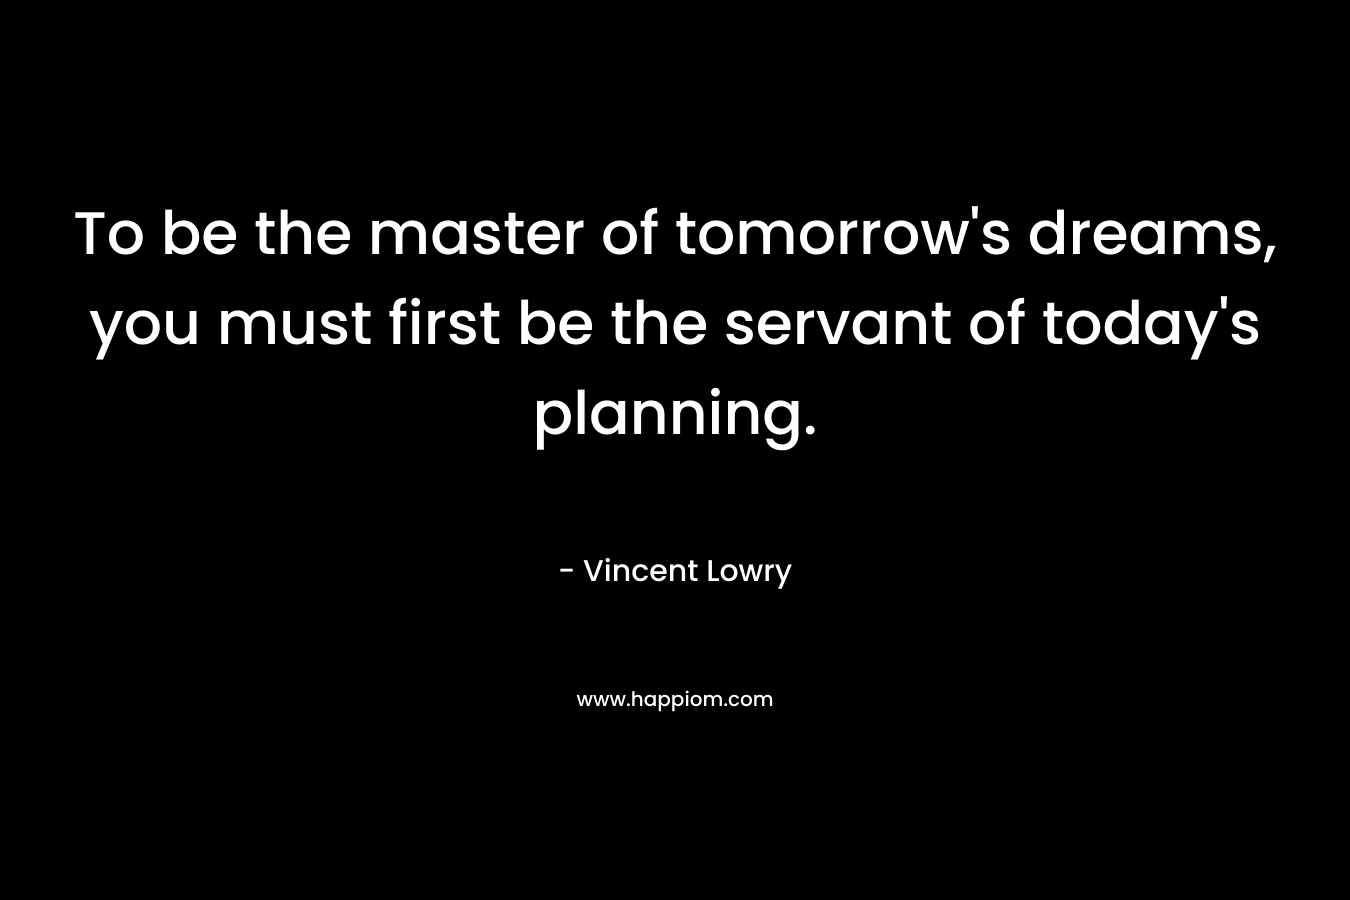 To be the master of tomorrow's dreams, you must first be the servant of today's planning.